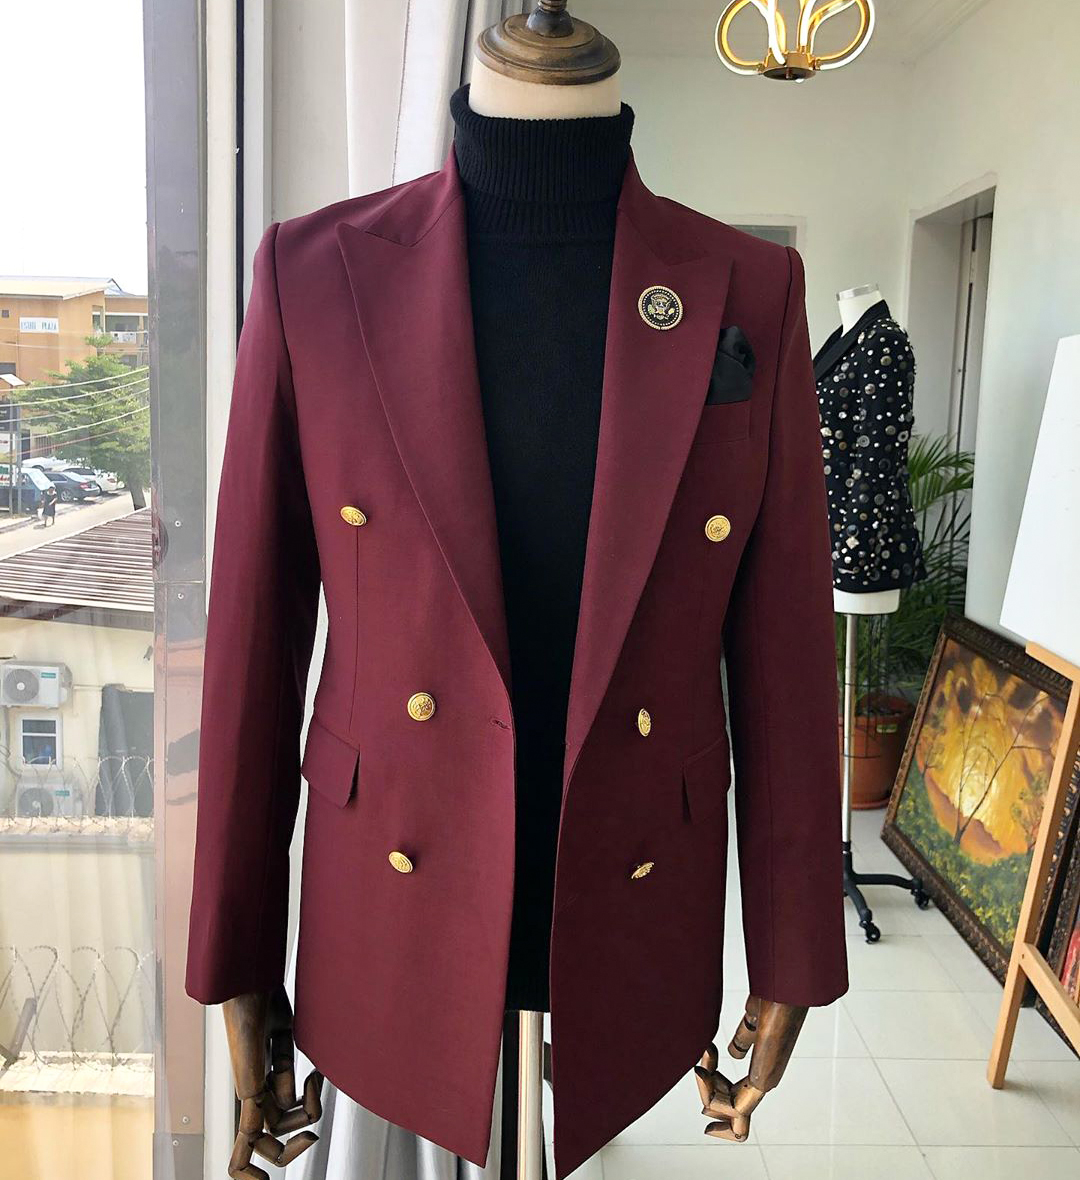 Matching black turtleneck with a burgundy suit jacket